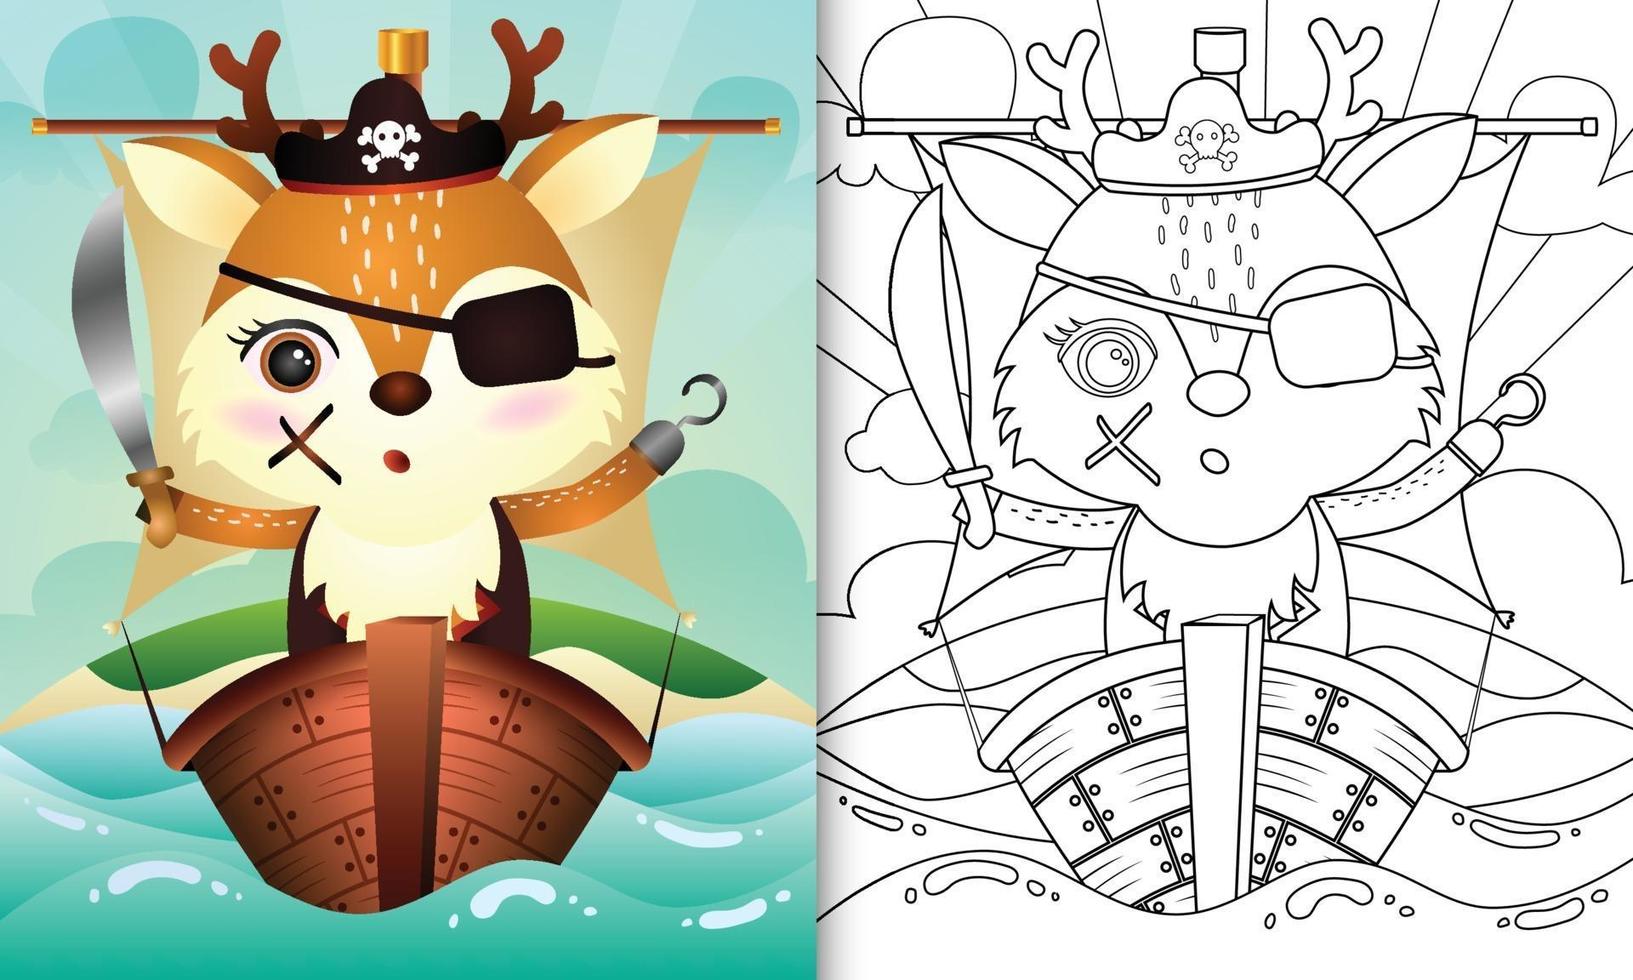 Coloring book for kids with a cute pirate deer character illustration vector